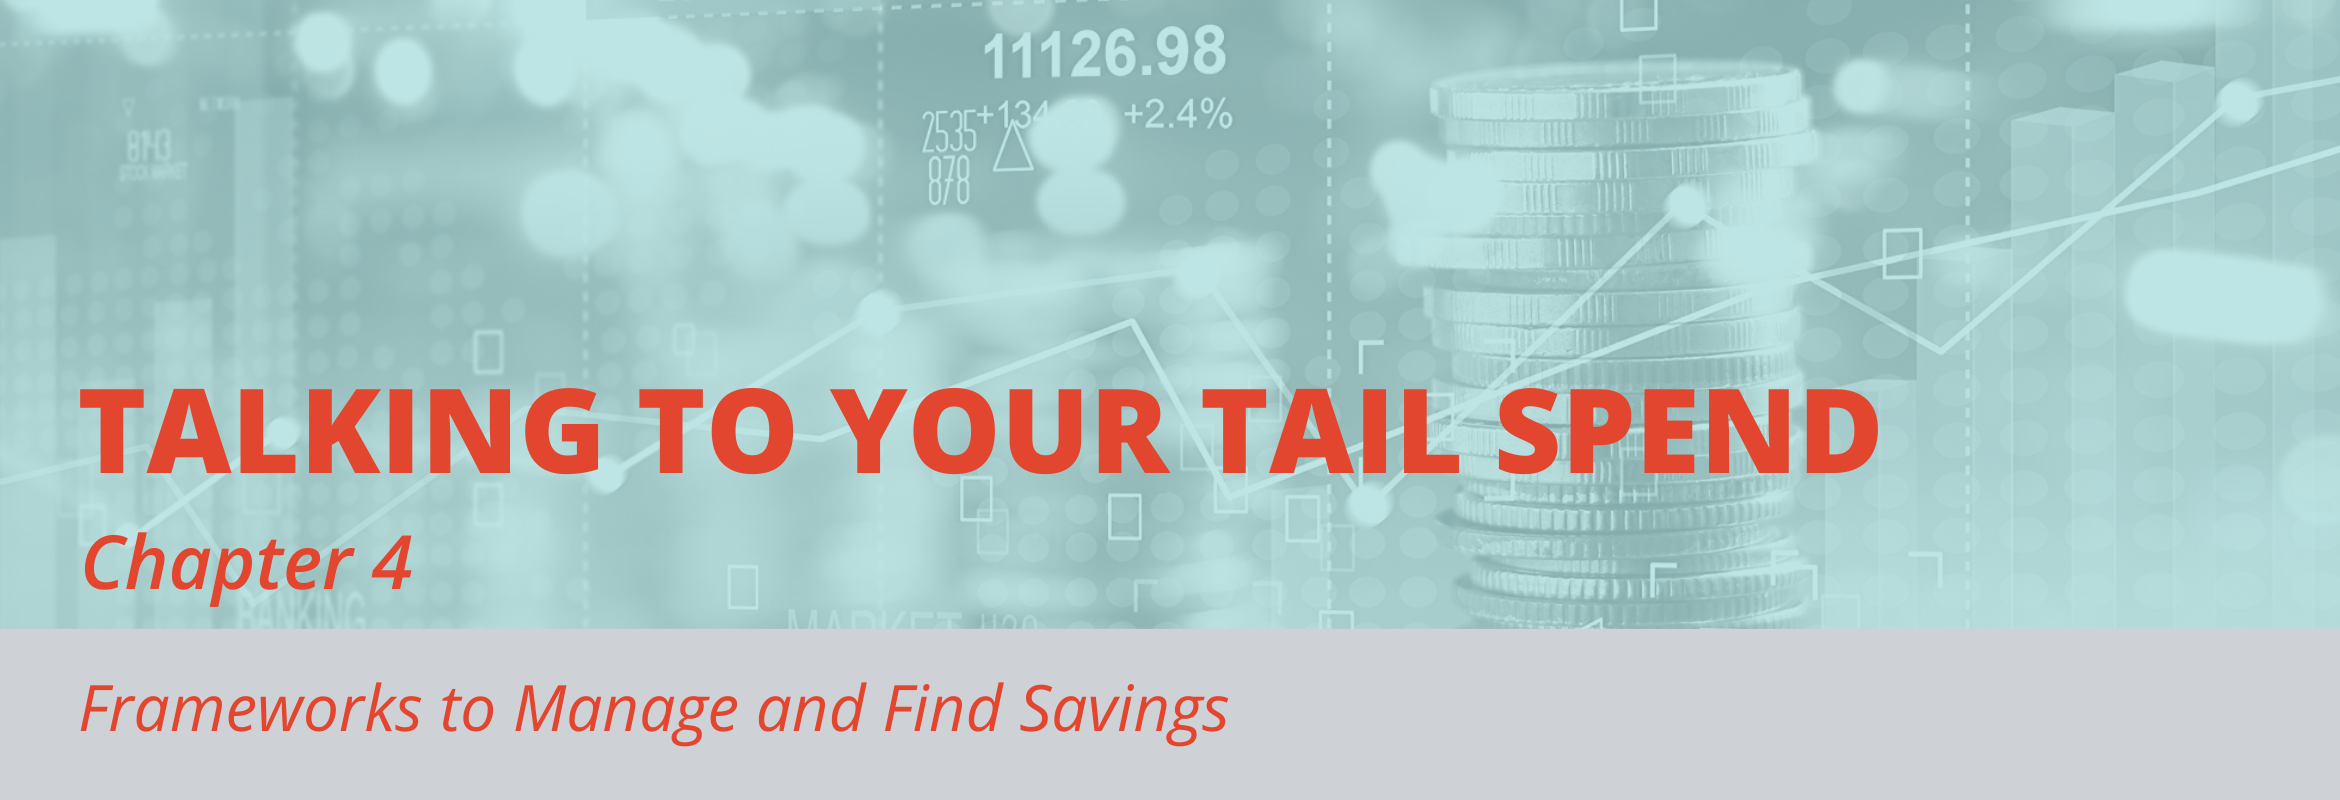 Find savings and learn how to build a strategic sourcing framework to help you manage tail spend.